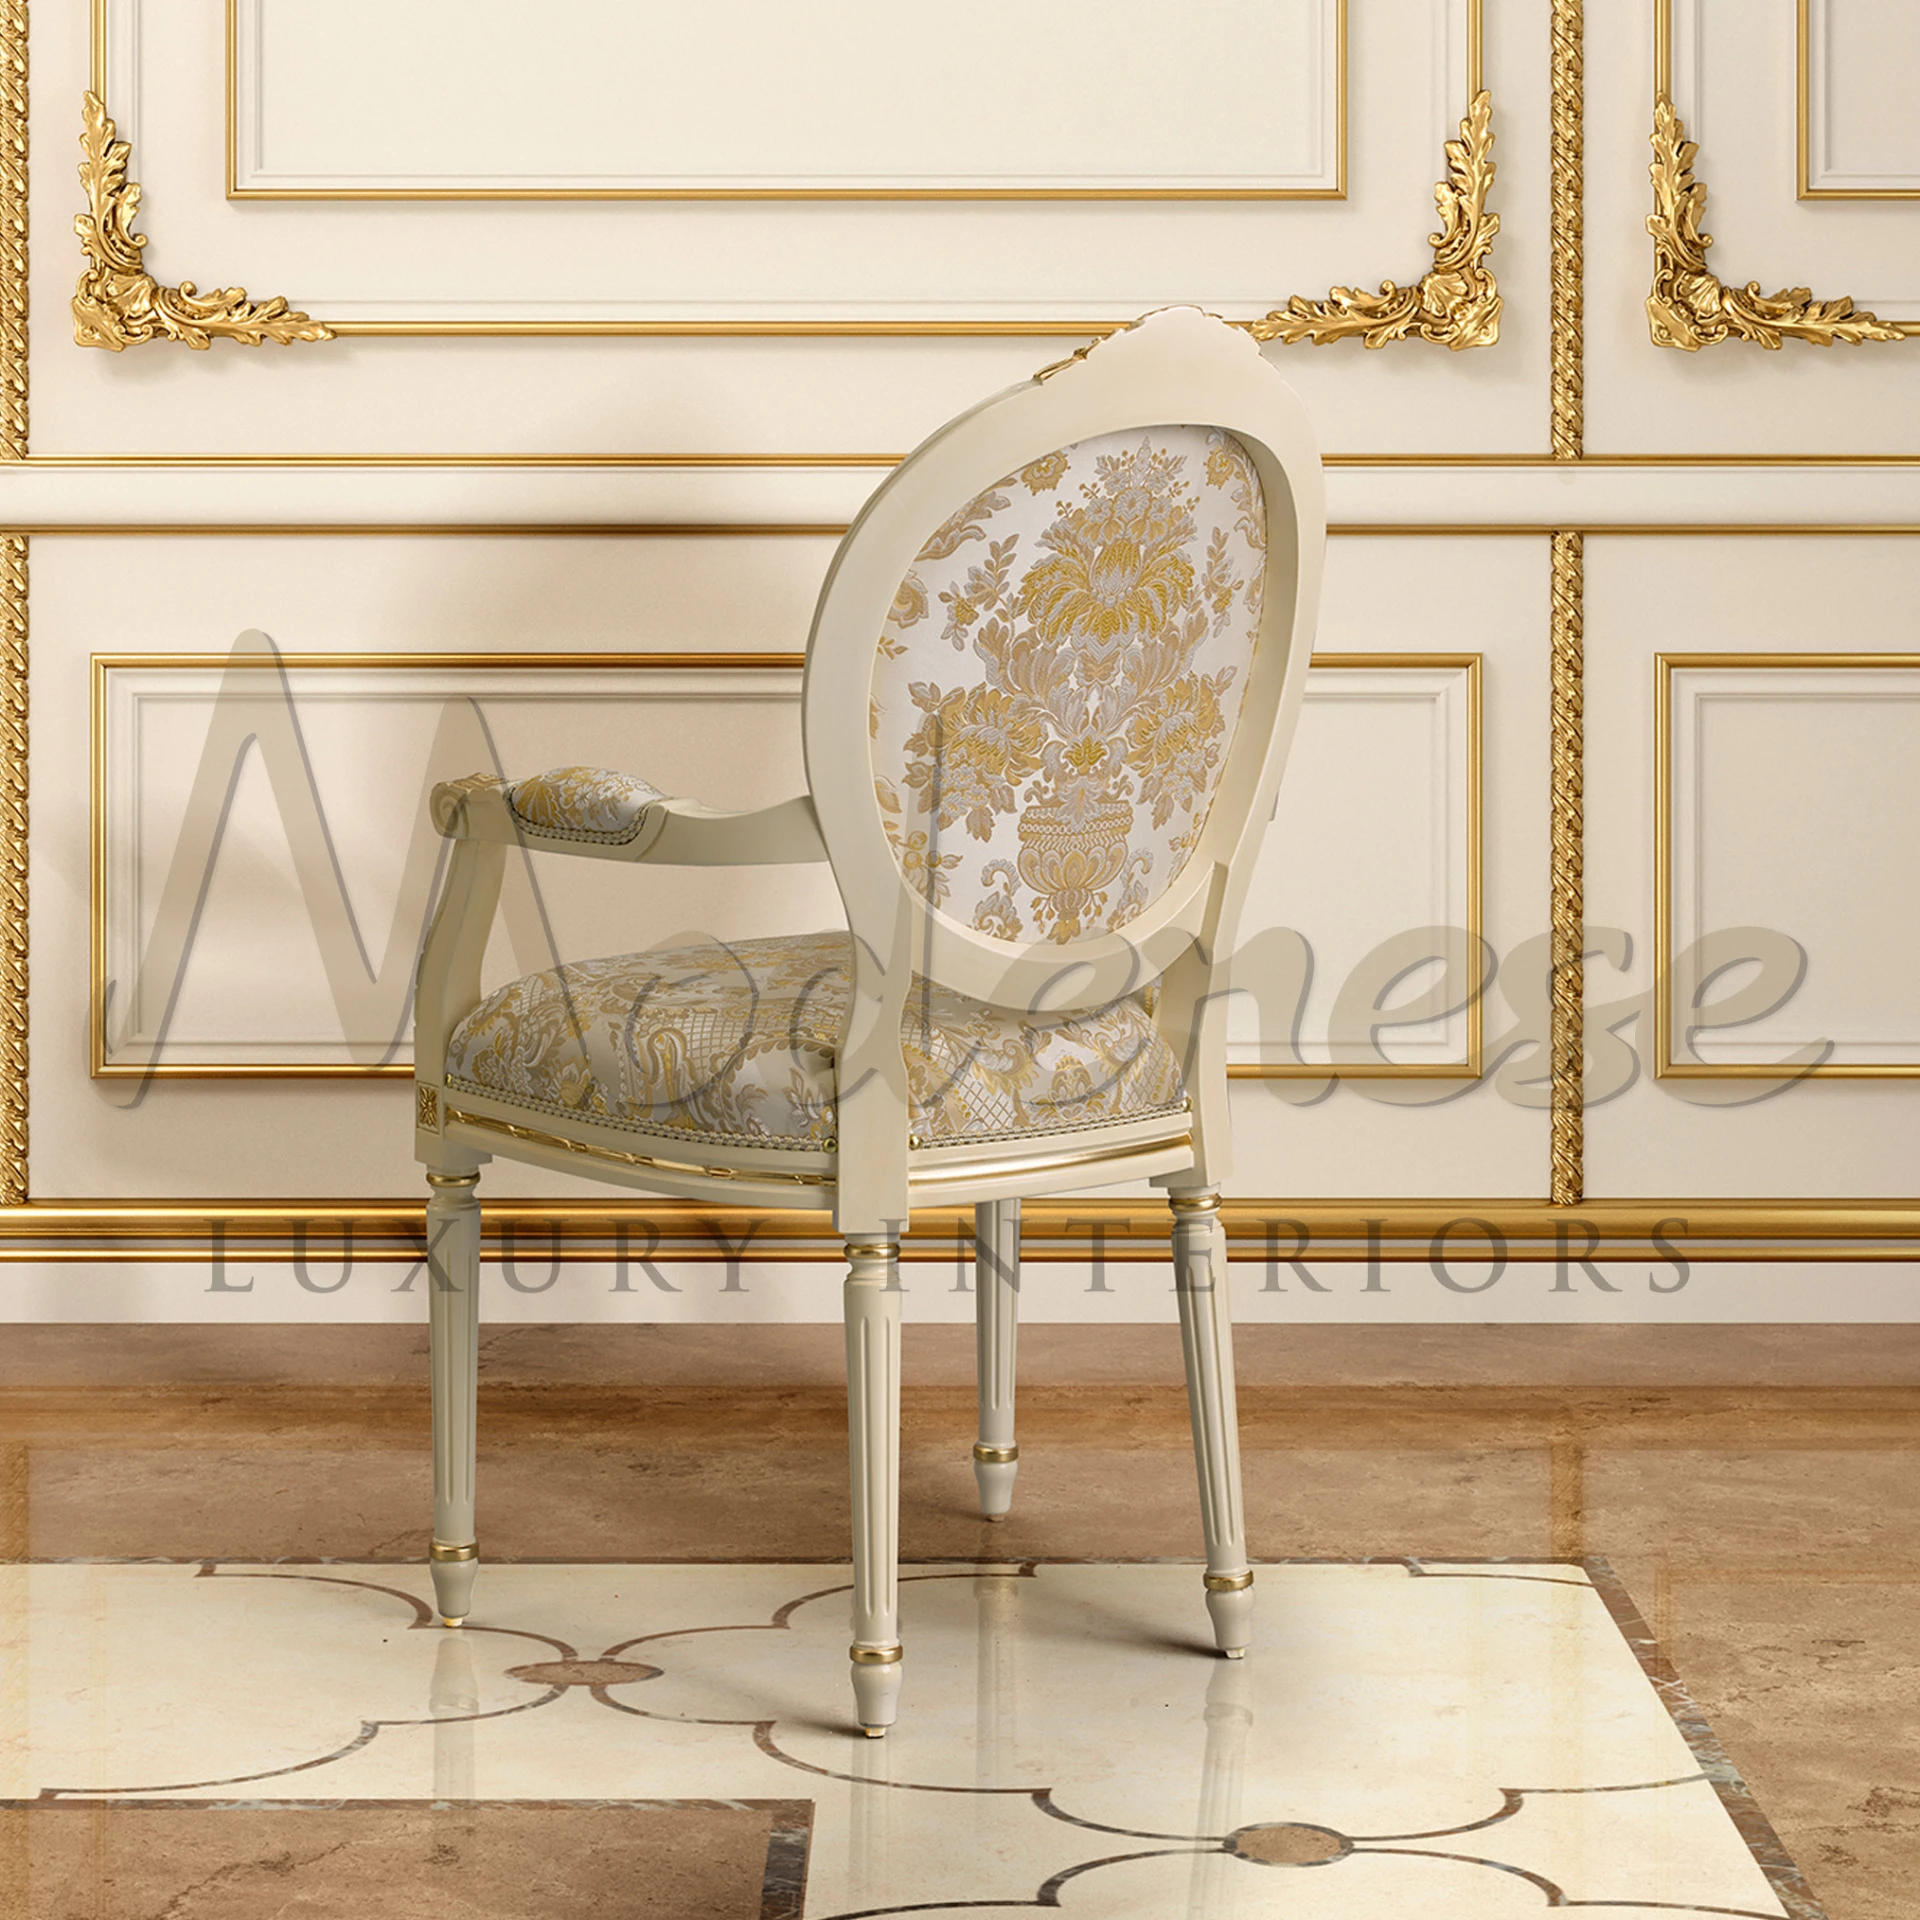 Classical creme furniture chair with floral design in a fancy decorated room.